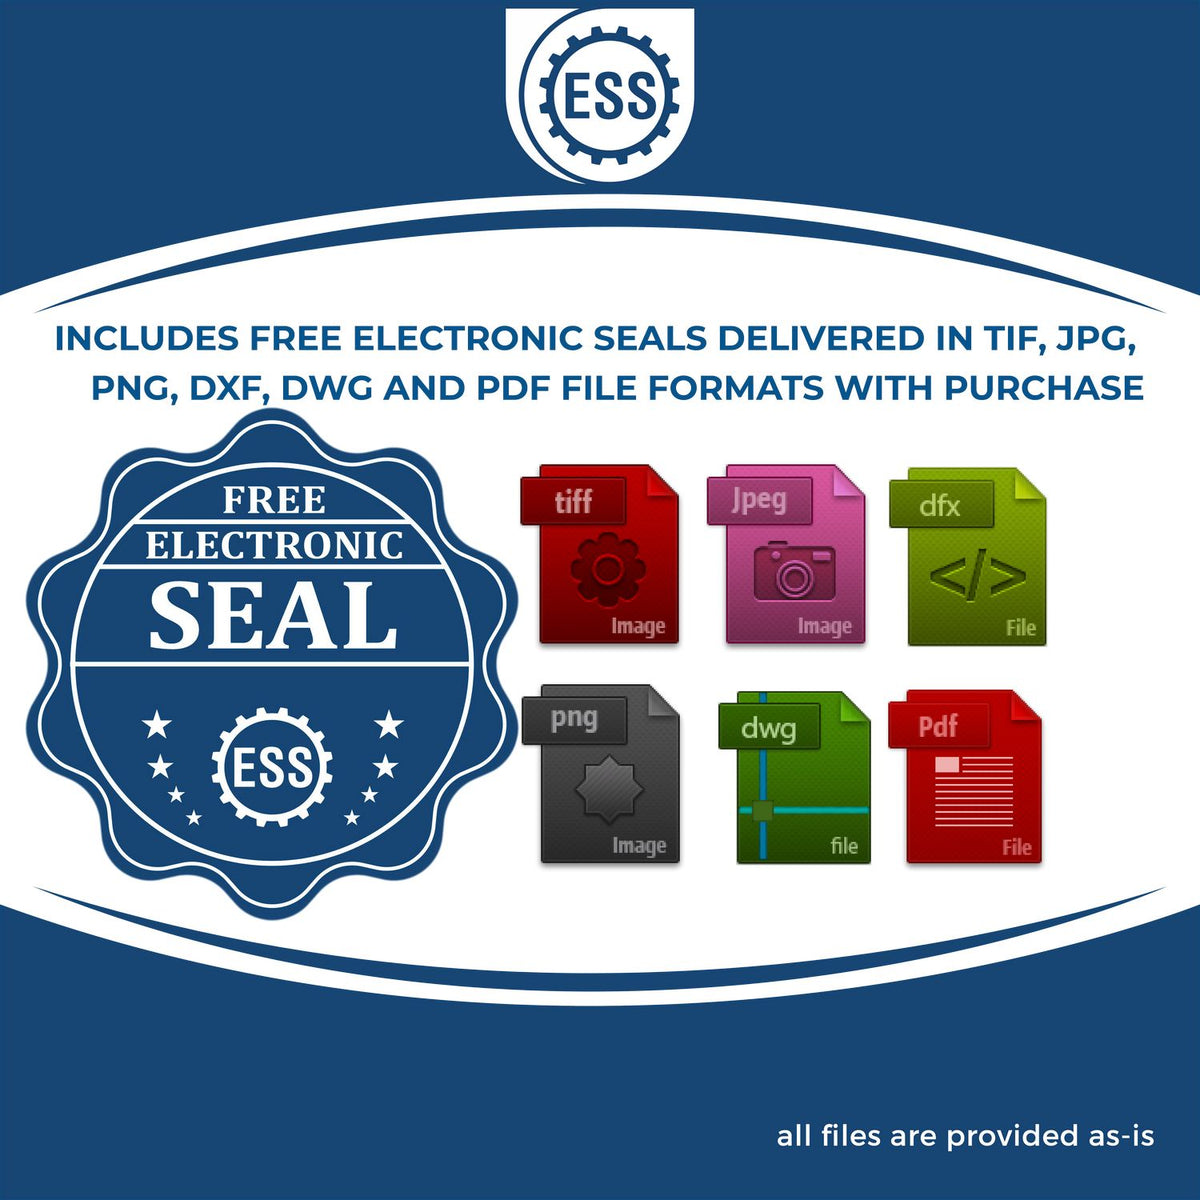 An infographic for the free electronic seal for the Slim Pre-Inked Rhode Island Professional Engineer Seal Stamp illustrating the different file type icons such as DXF, DWG, TIF, JPG and PNG.